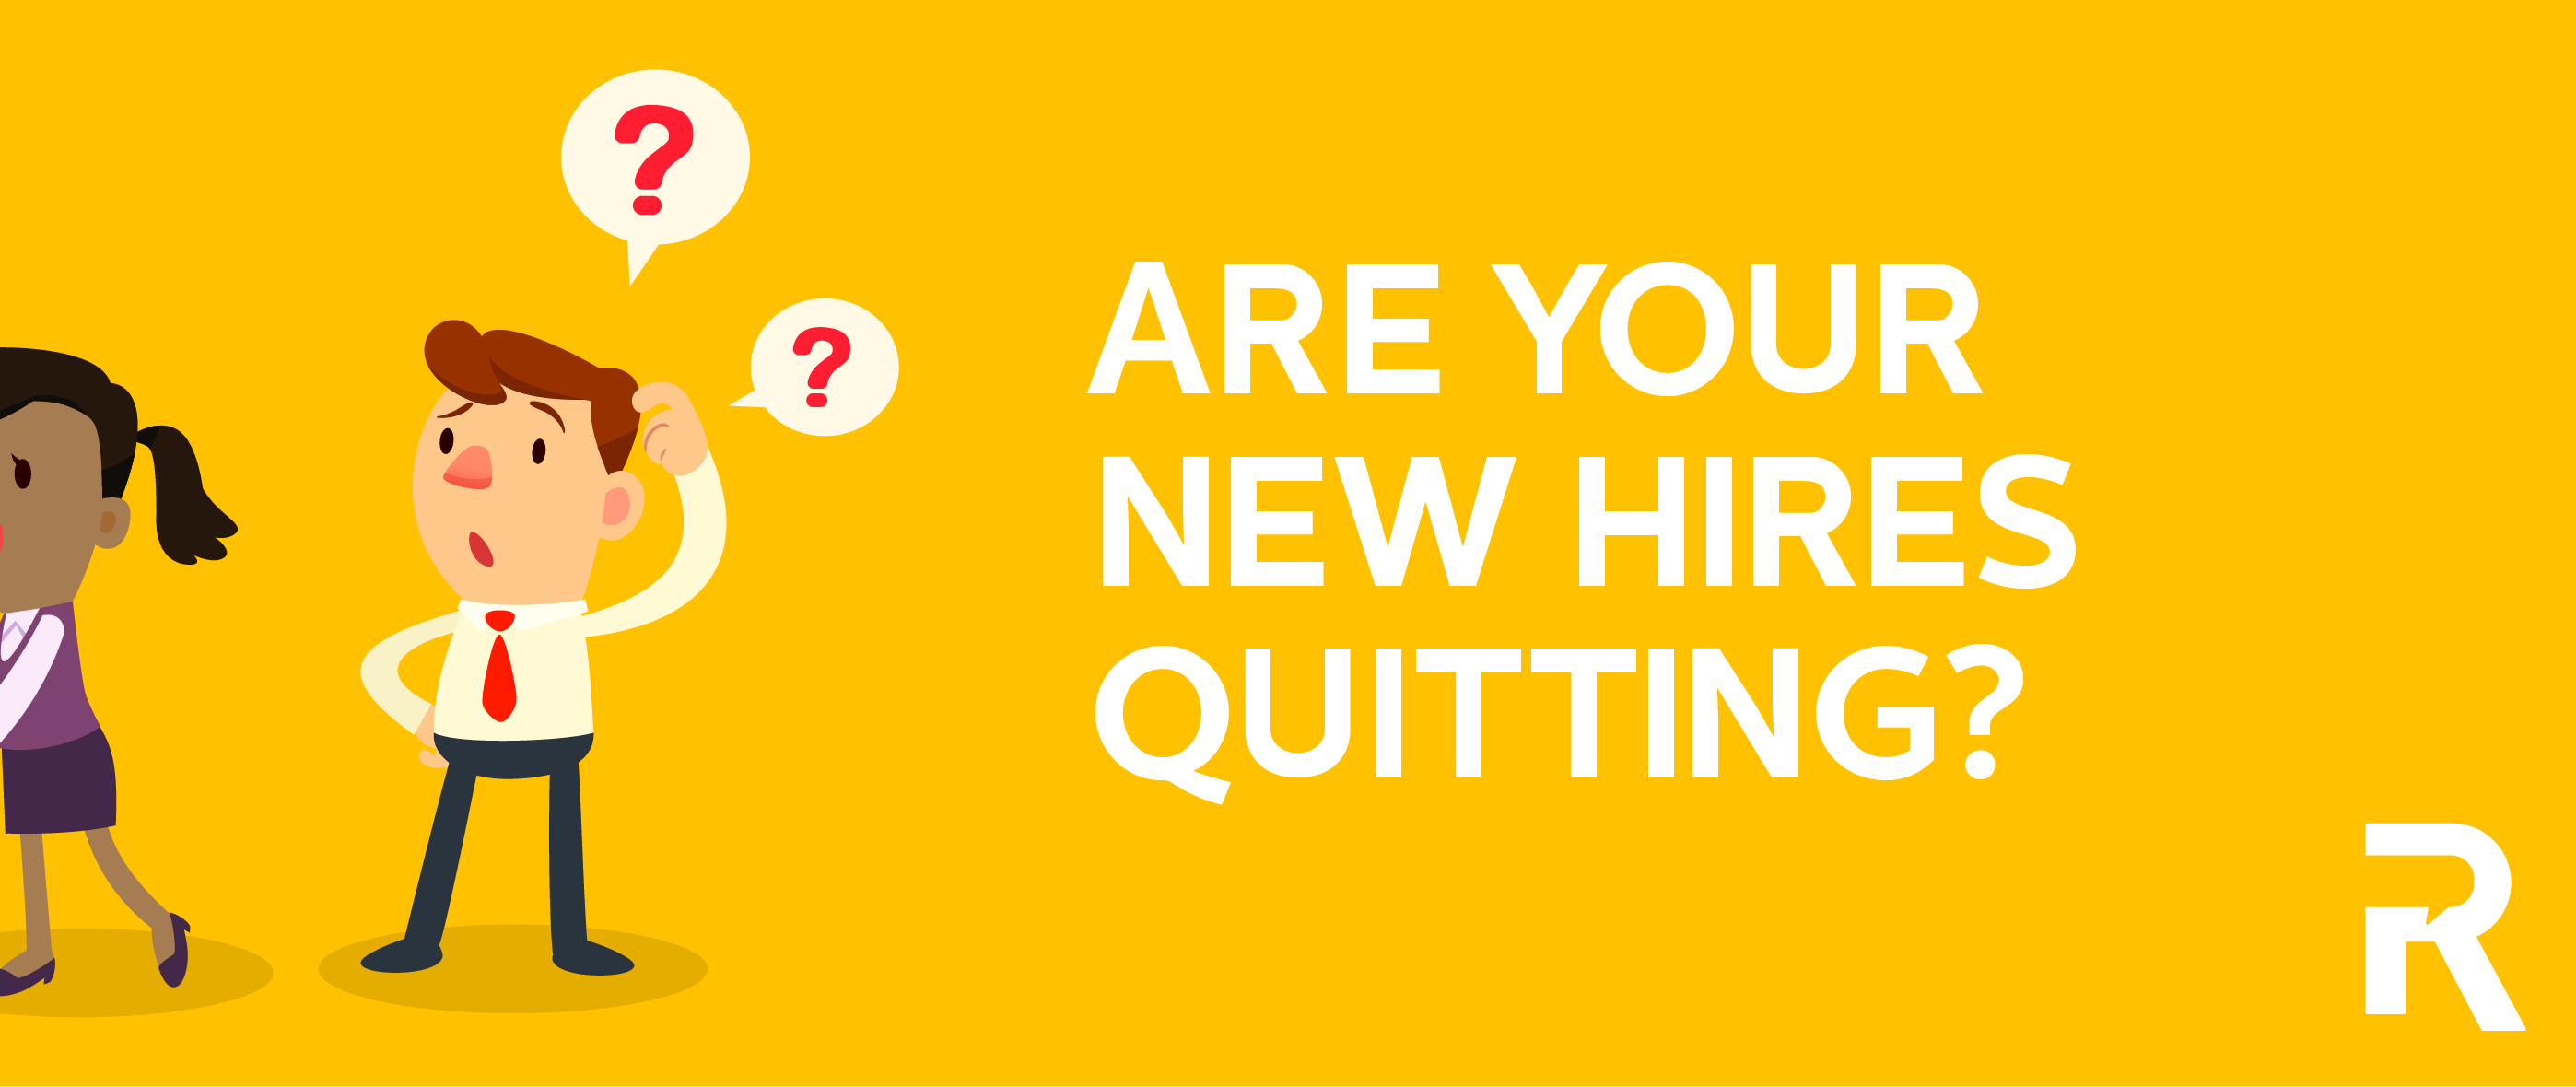 Are Your New Hires Quitting?